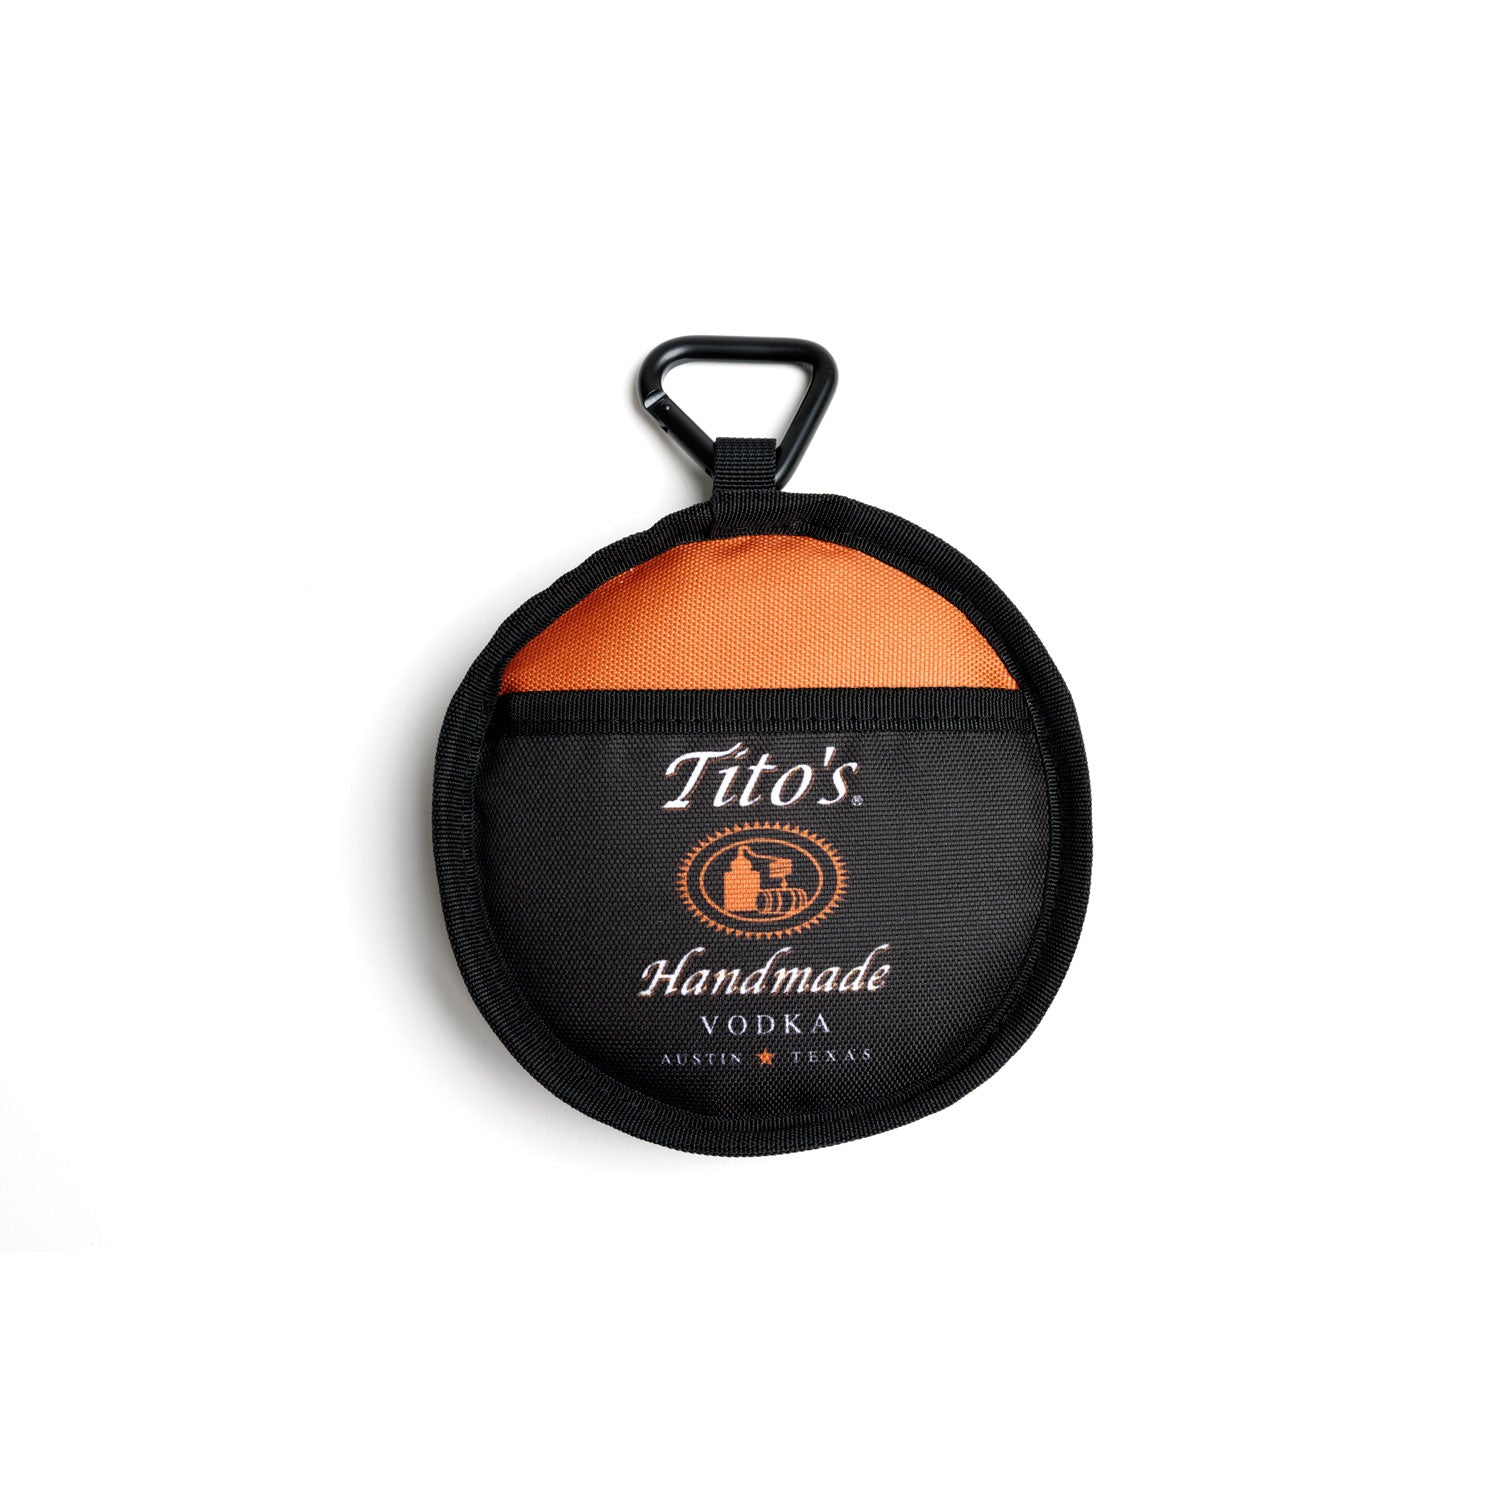 Closed view of black, orange, and white collapsible dog bowl with Tito's Handmade Vodka logo and dog leash carabiner